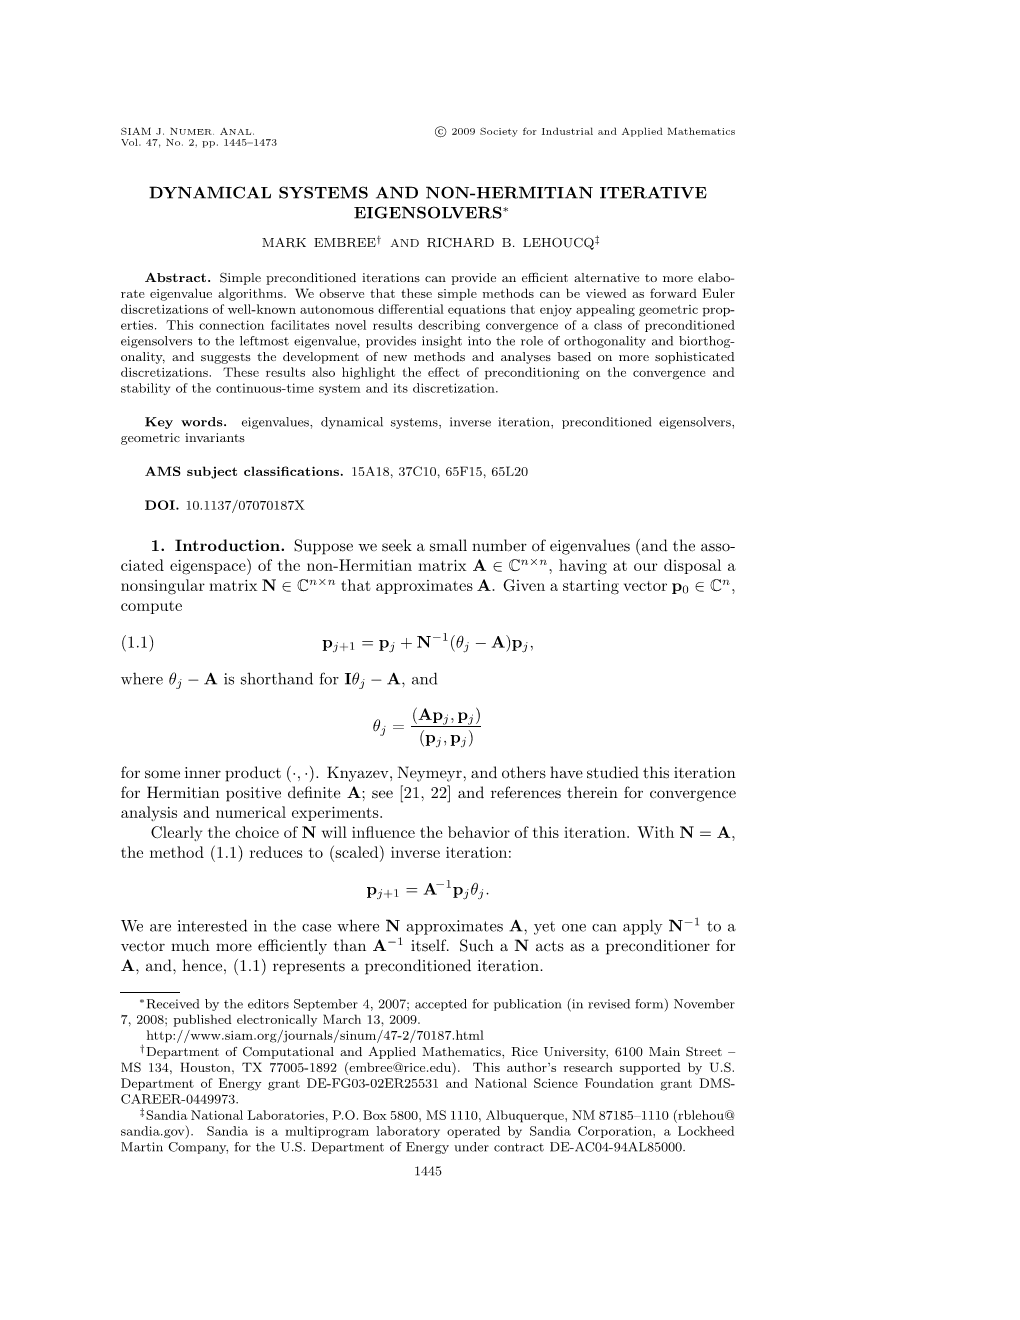 Dynamical Systems and Non-Hermitian Iterative Eigensolvers∗